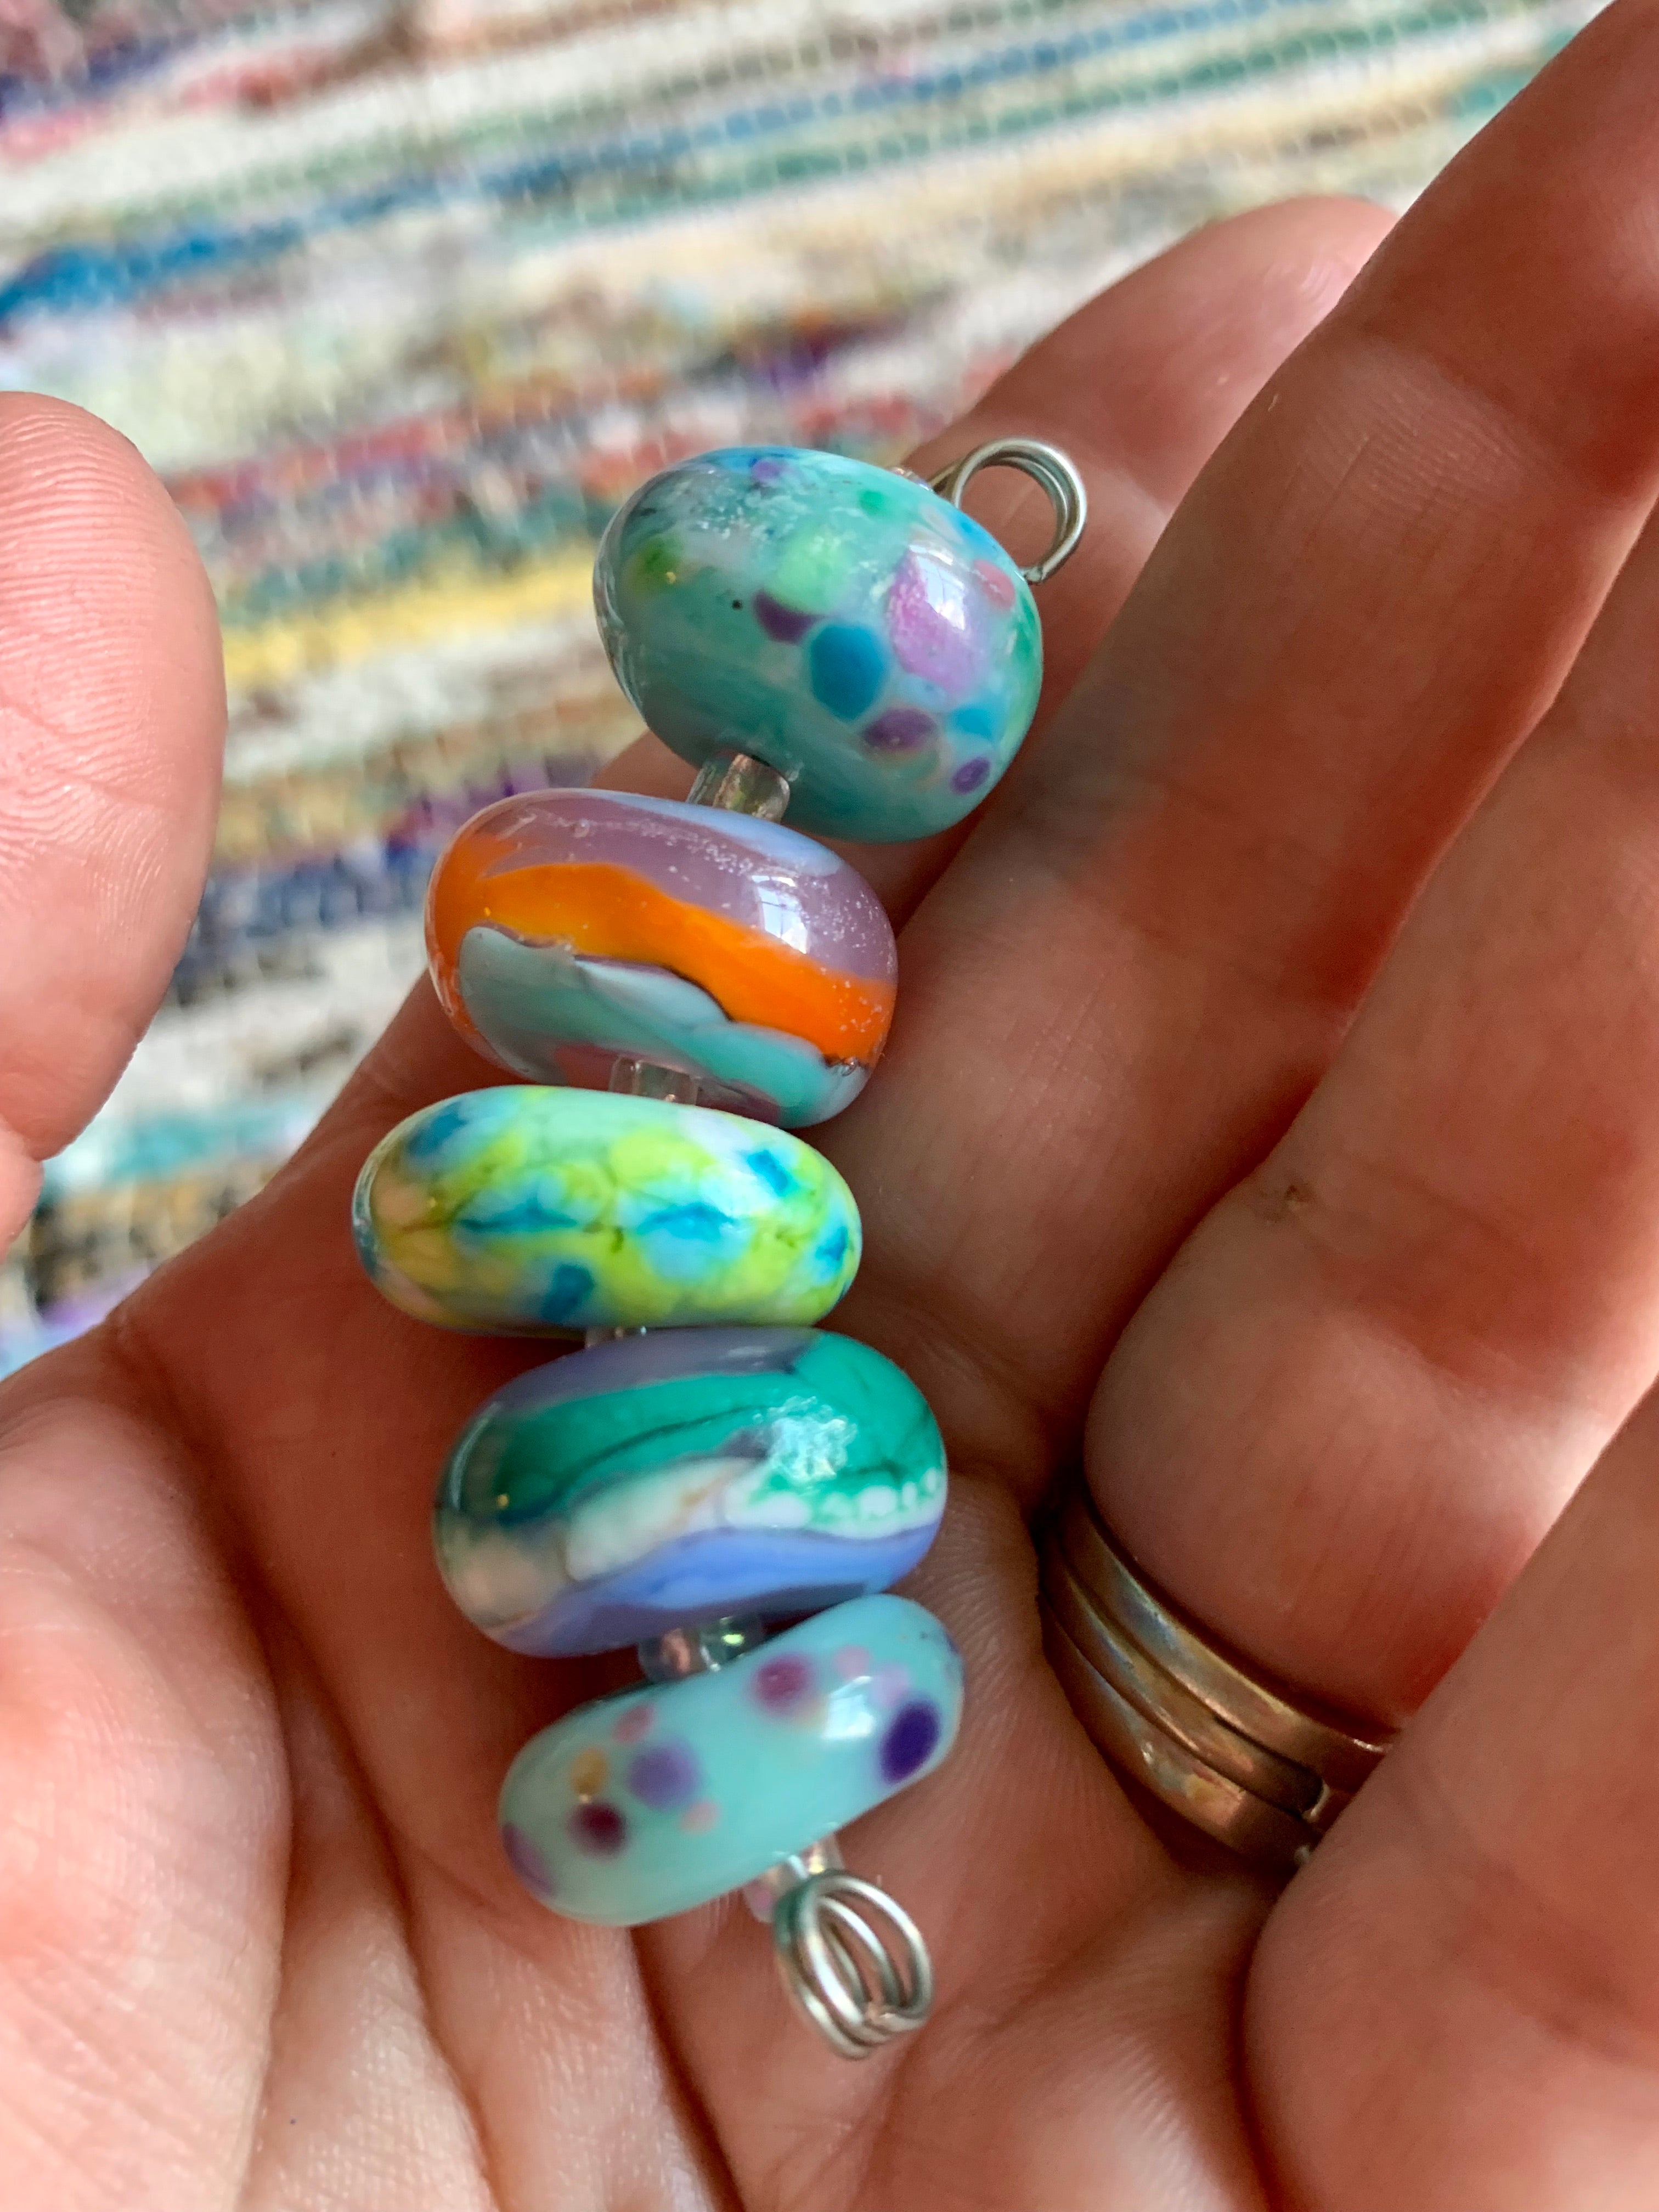 Set of 5 large summer inspired beads in bright teal, turquoise, and greens